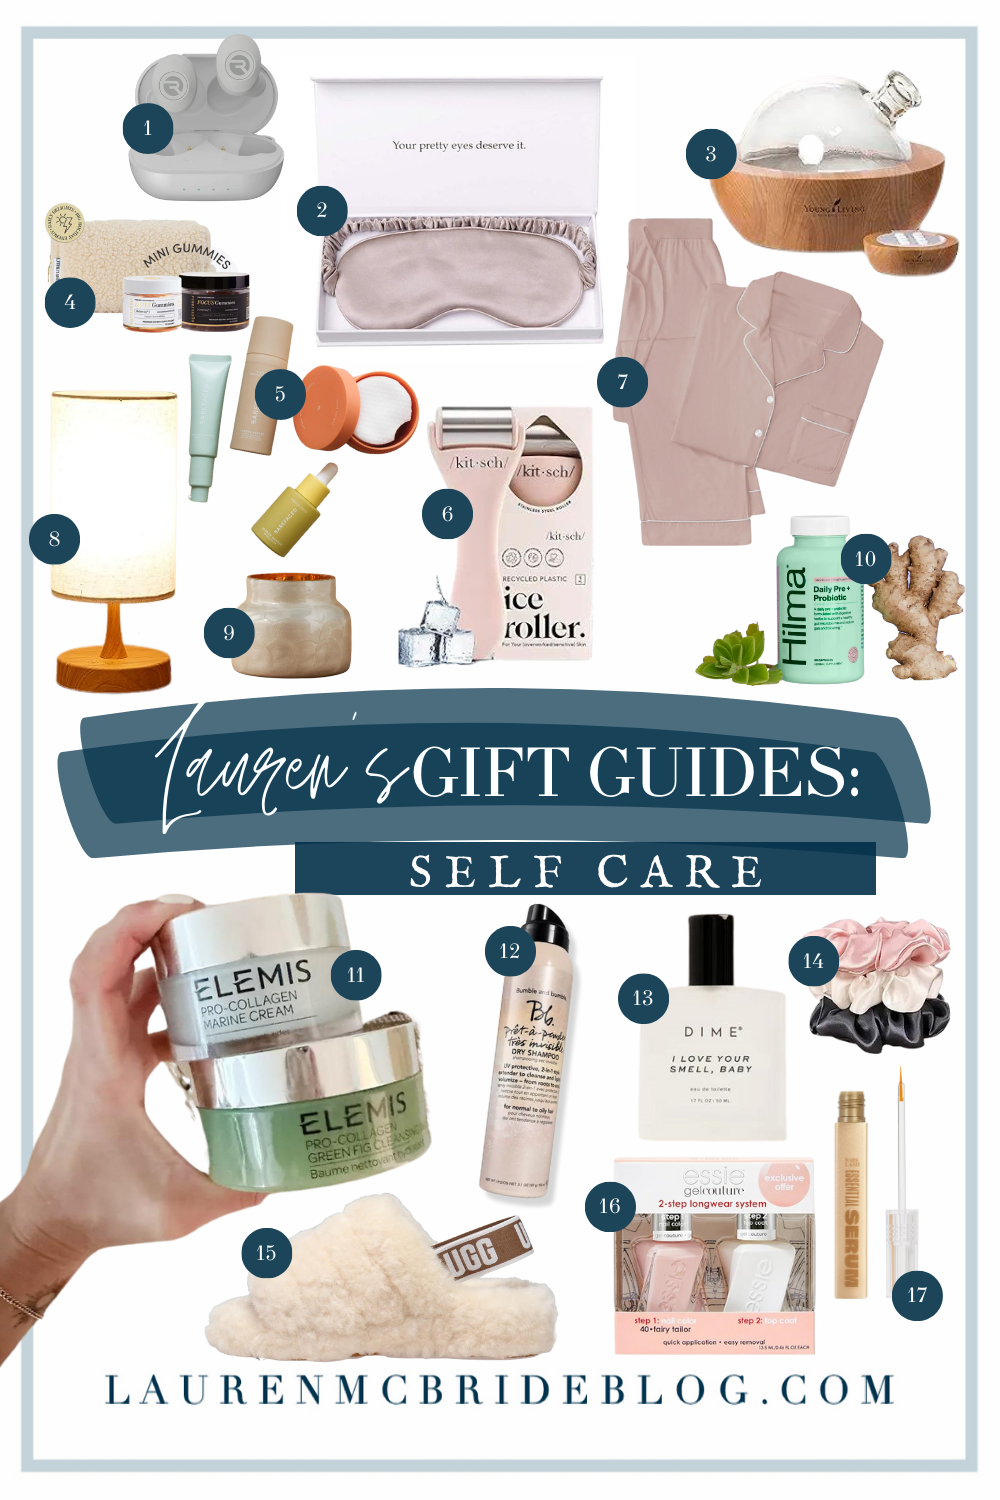 The Best Gifts to Give Yourself This Season